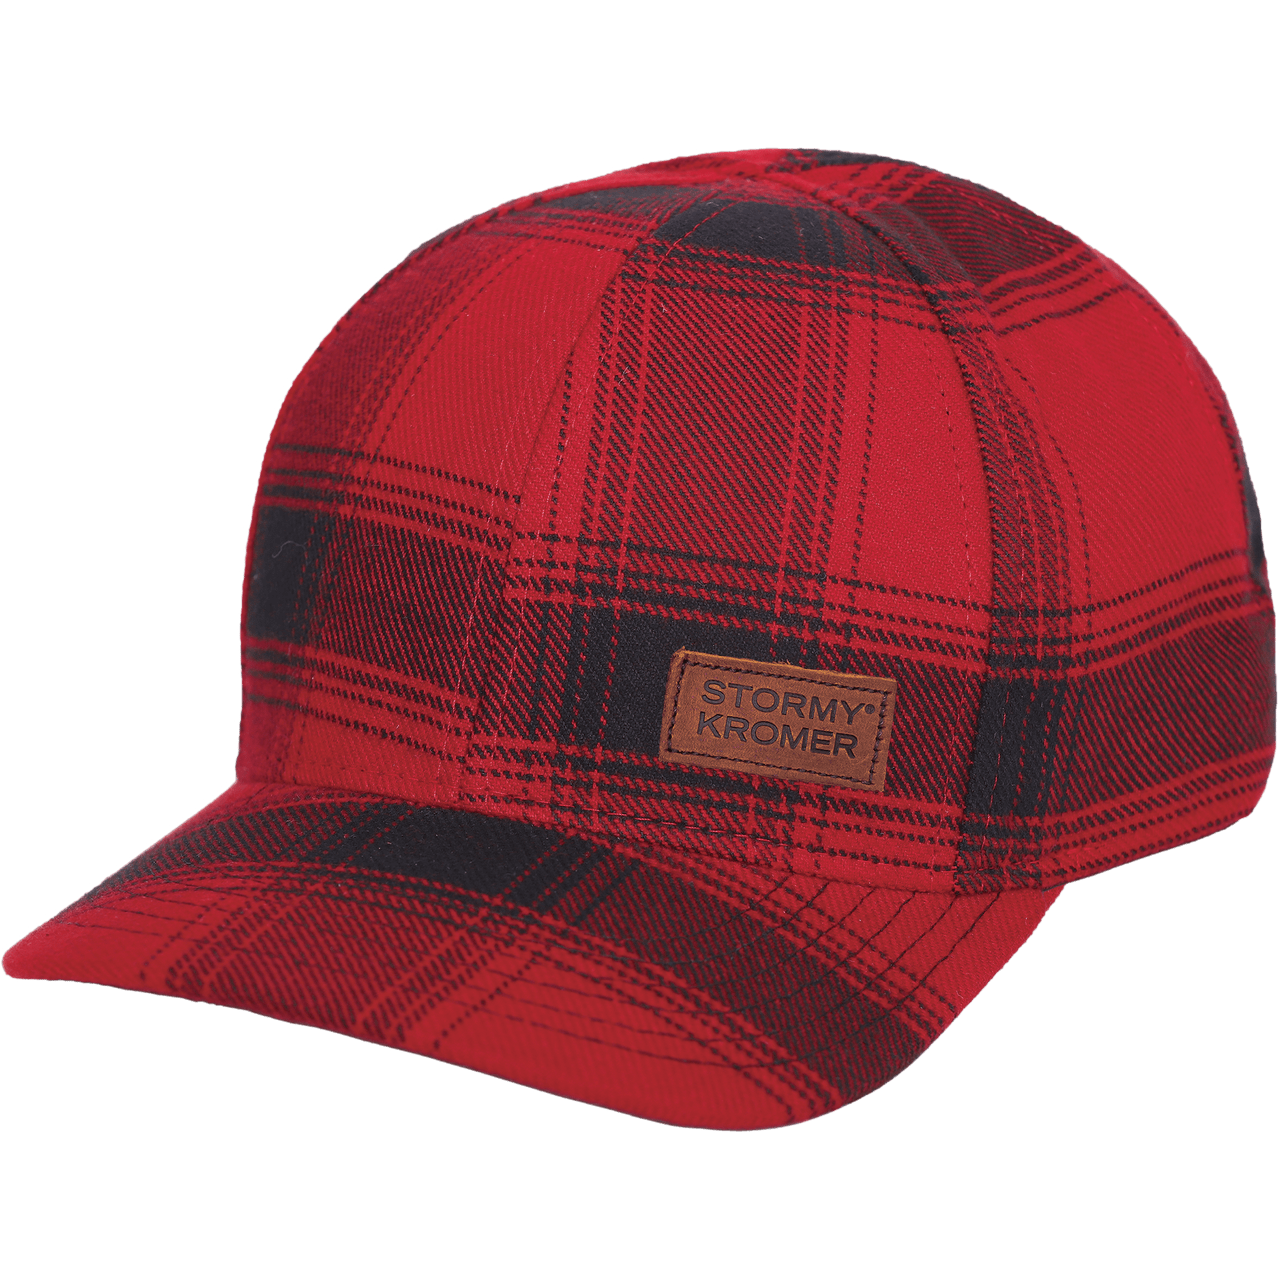 Stormy Kromer Flannel adjustable curveball hat in black and red plaid